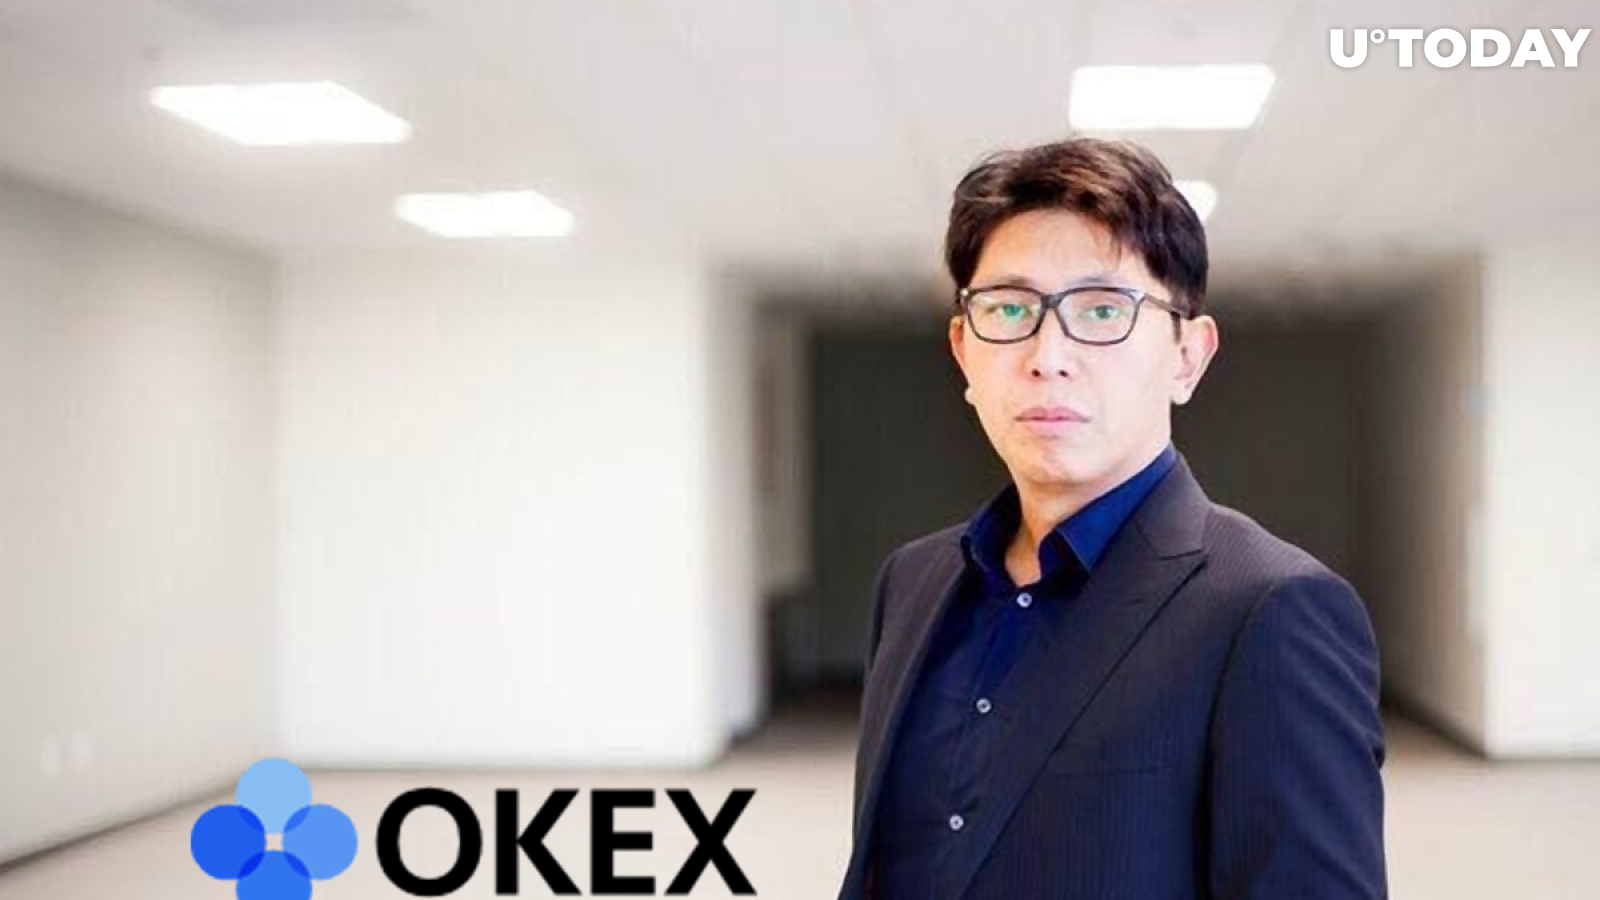 OKEx CEO Promises Withdrawal Launch on Nov 27 with 100% Reserves for It: Insider Colin Wu